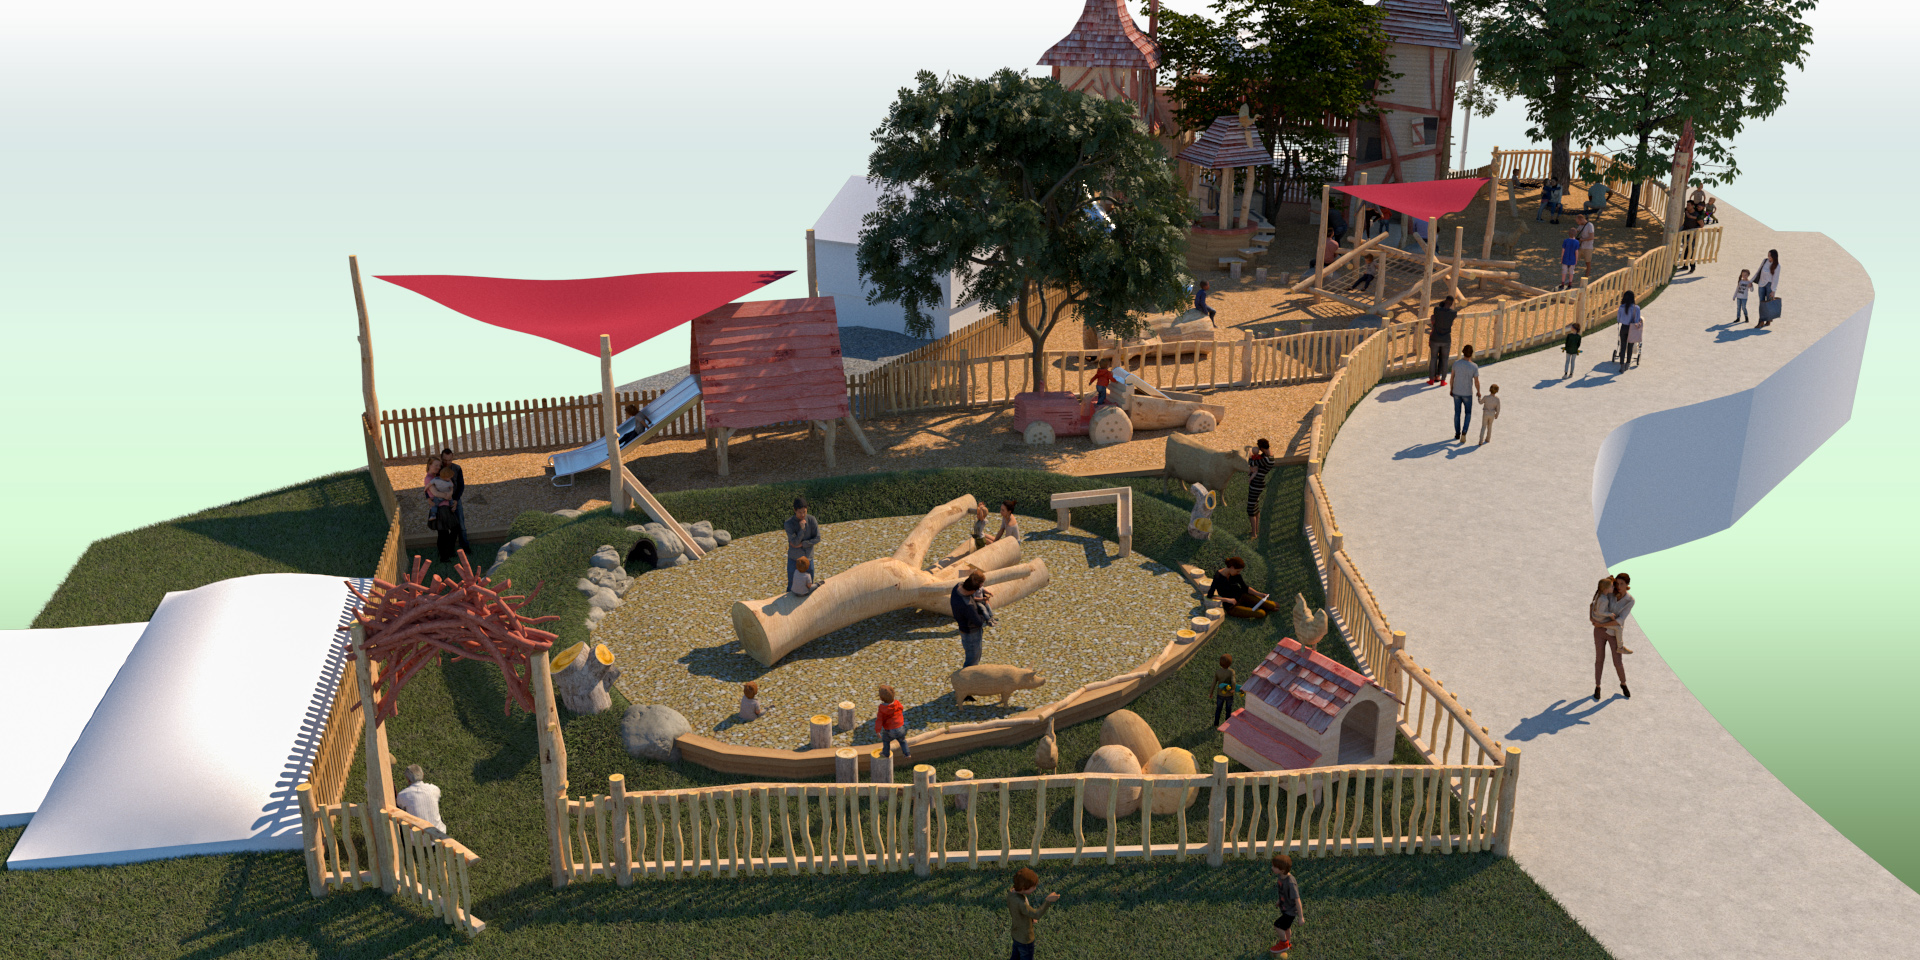 A 3D rendering of an outdoor playground surrounded by a wooden fence, featuring various play structures, climbing frames, slides, and a red shade sail. The playground is bustling with children and adults, and is covered with a material that appears to be sand or small pebbles for safety. Trees and greenery surround the playground, adding to its aesthetic appeal.